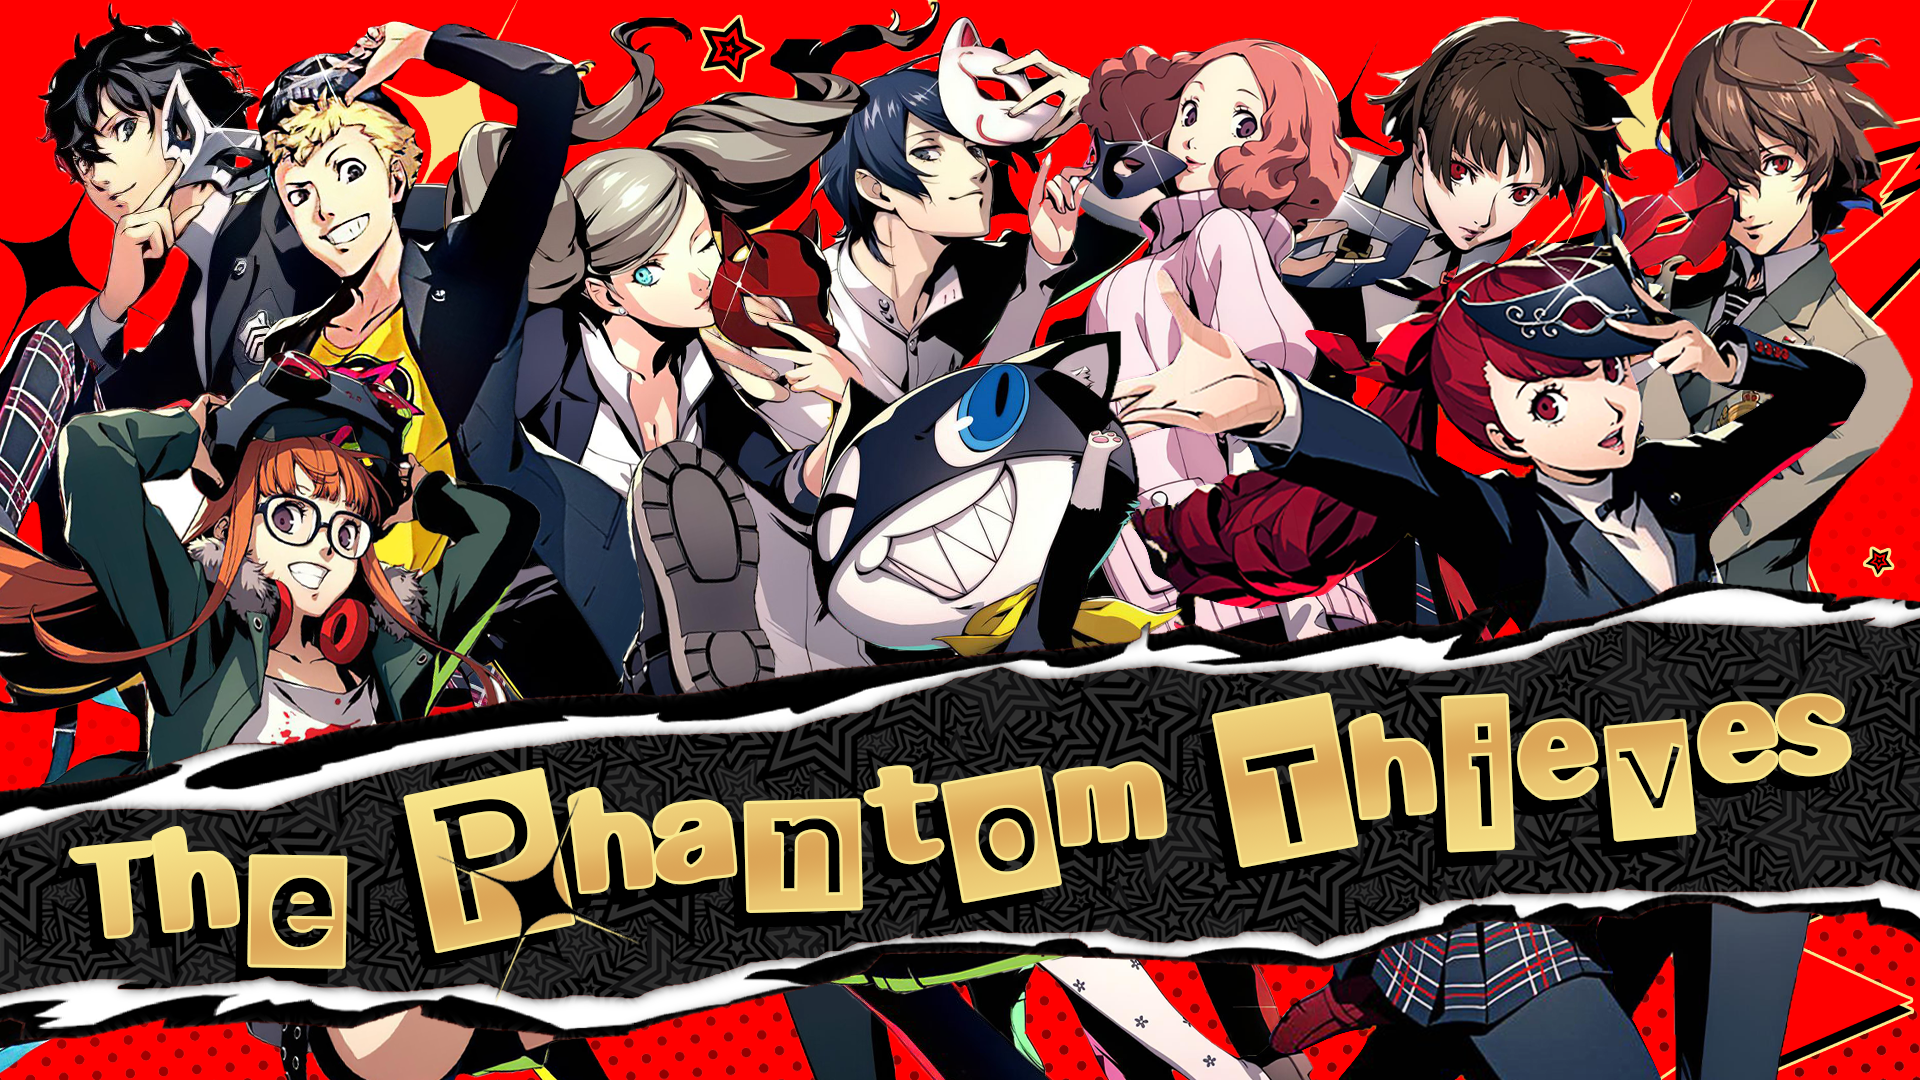 Couldn't find a Phantom Thieves wallpaper that I really liked so I made one myself :): Persona5